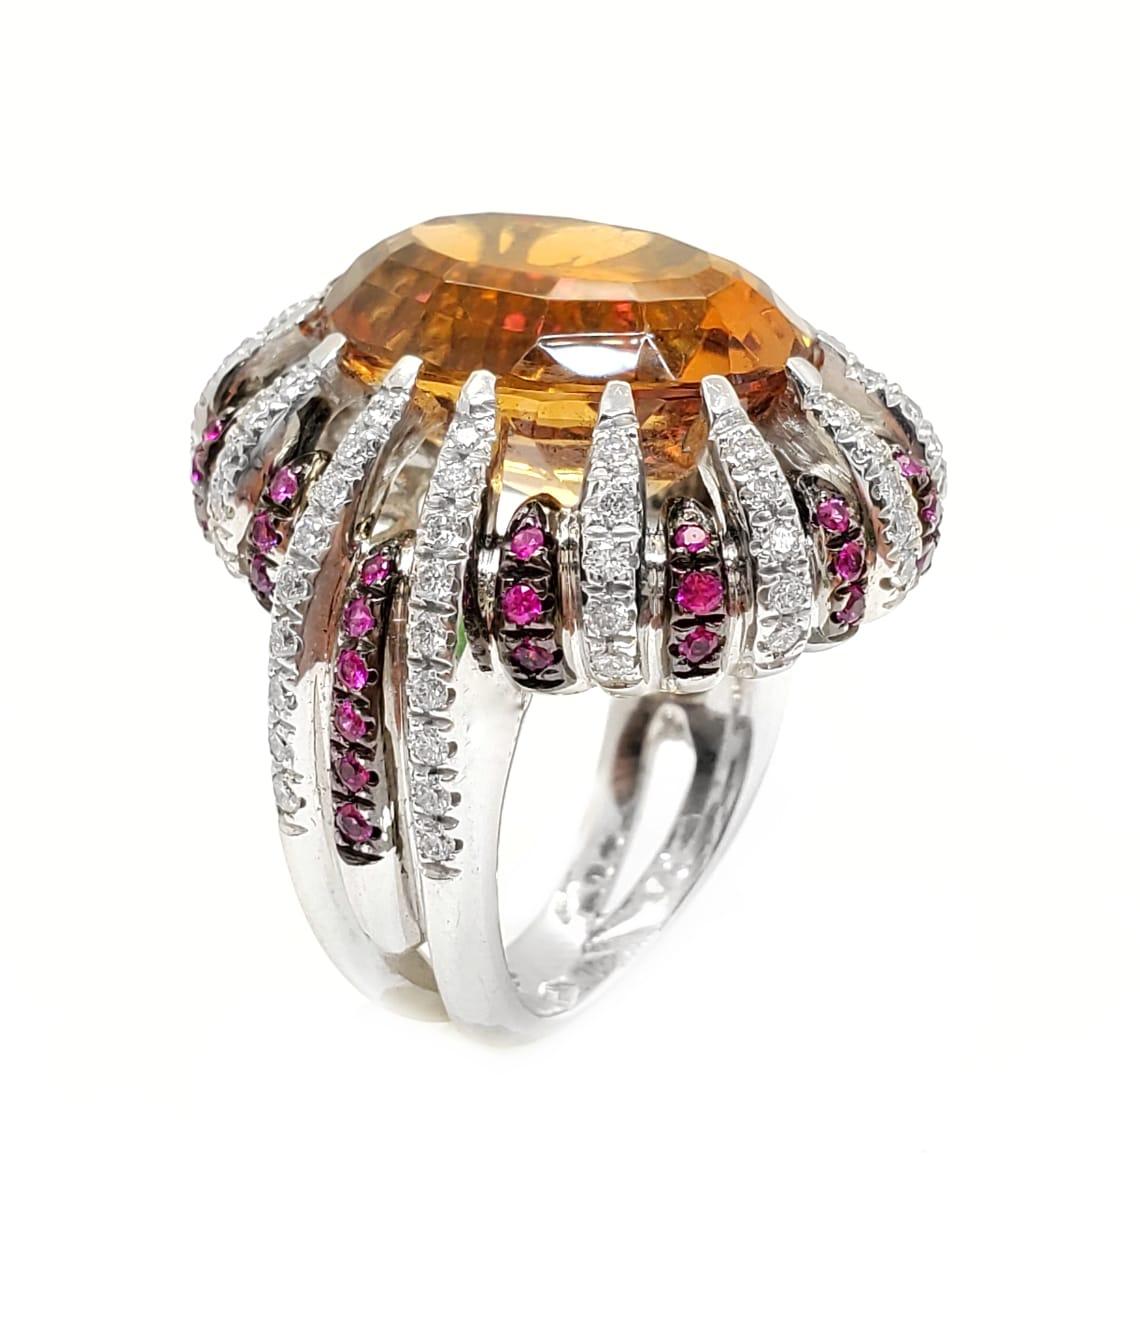 Andreoli Diamond Citrine Pink Sapphire 18 Karat White Gold Ring

This ring features:
- 0.84 Carat Diamond
- 2.61 Carat Citrine
- 0.53 Carat Pink Sapphire
- 21.35 Gram 18K White Gold
- Made In Italy